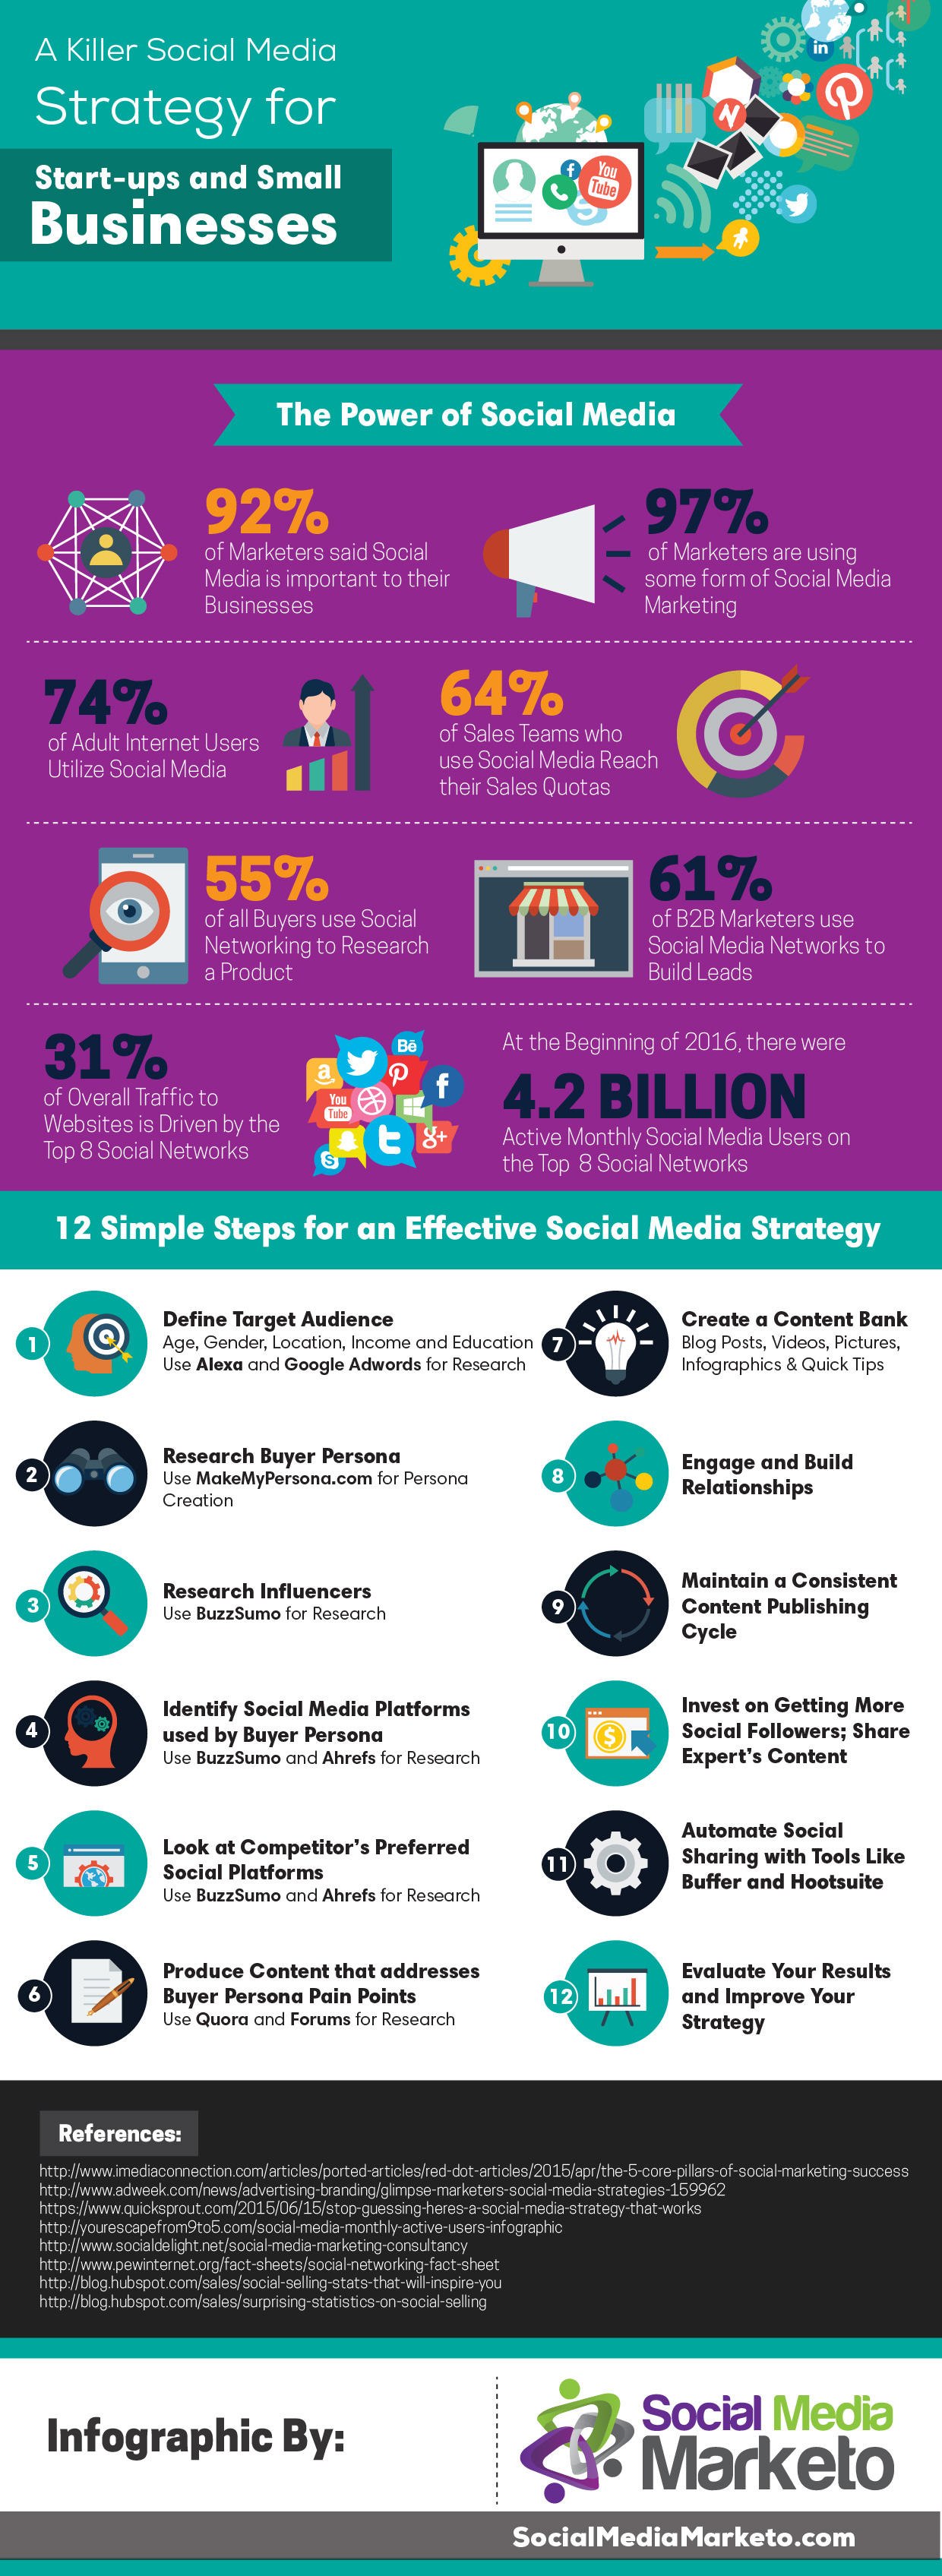 a-killer-social-media-marketing-strategy-for-startups-and-small-businesses-infographic